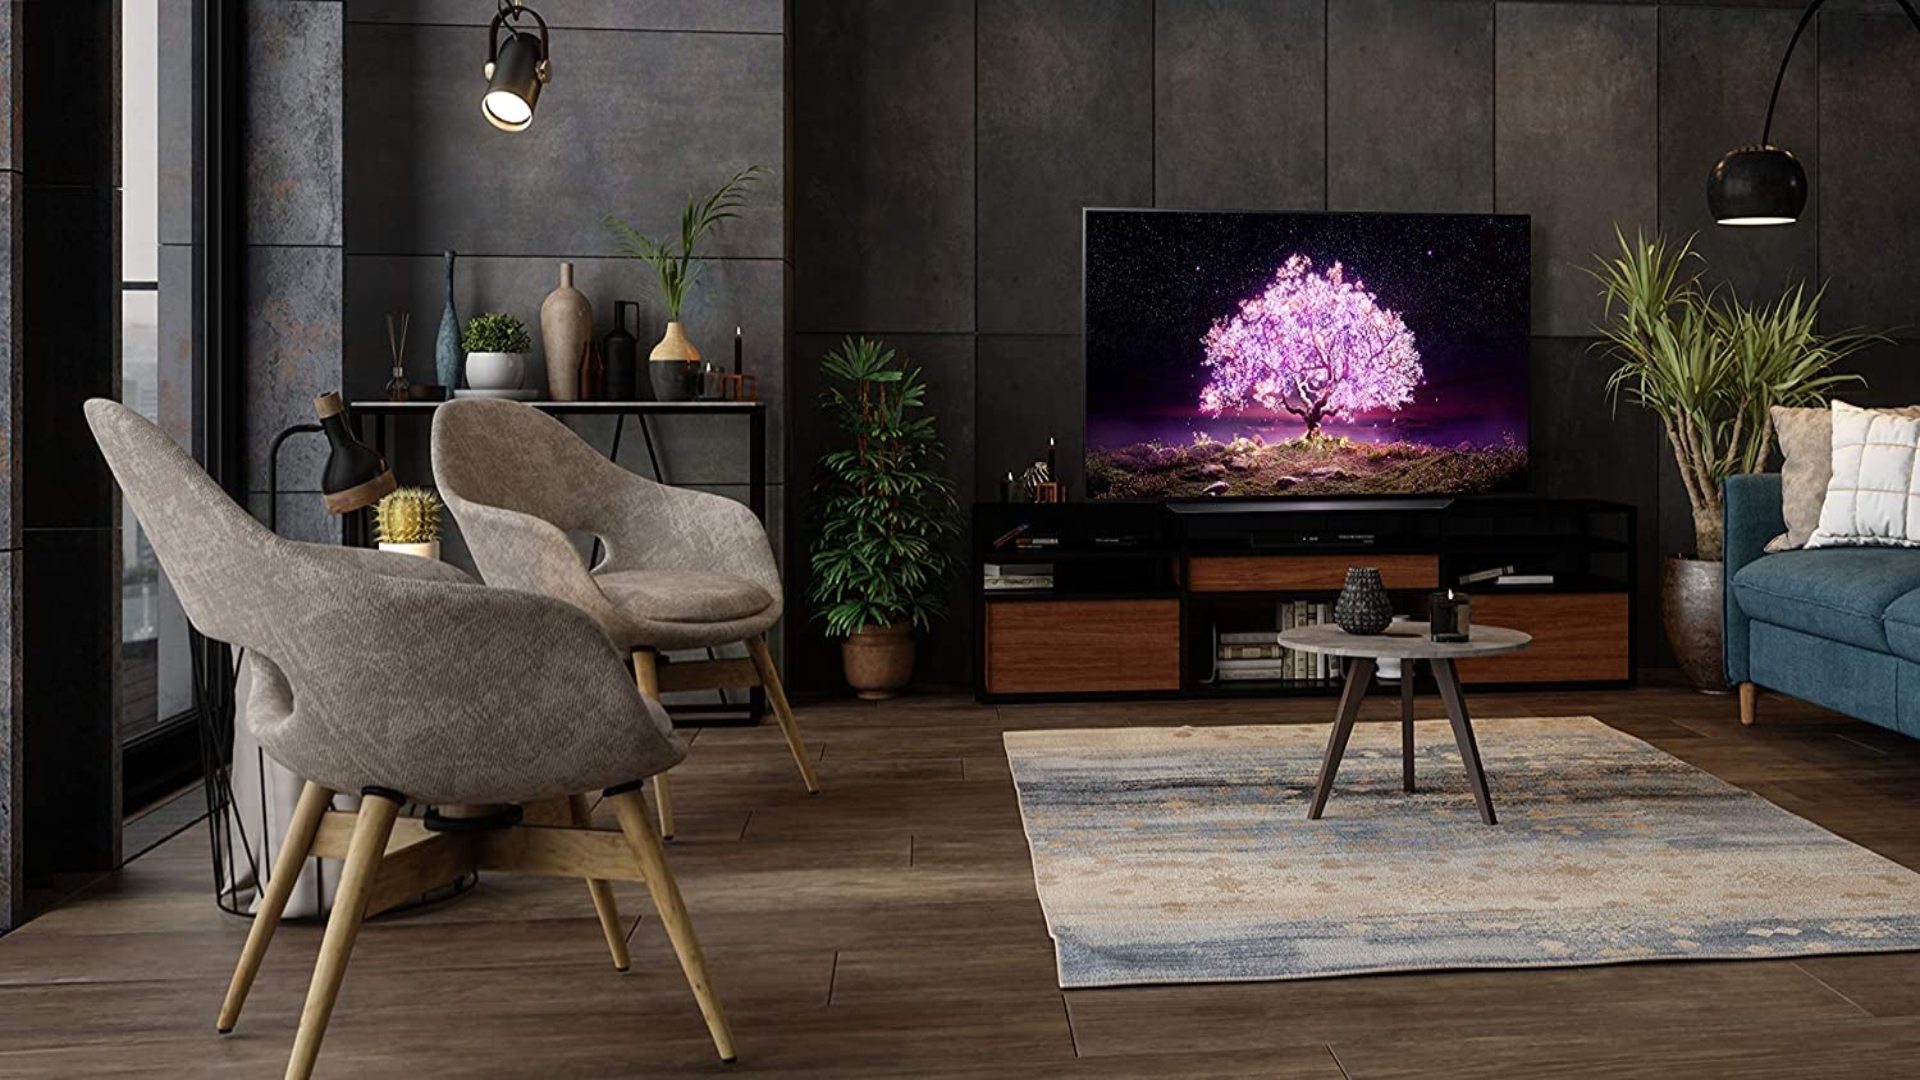 The LG OLED C1 is 2021's best gaming TV and now $2000 off